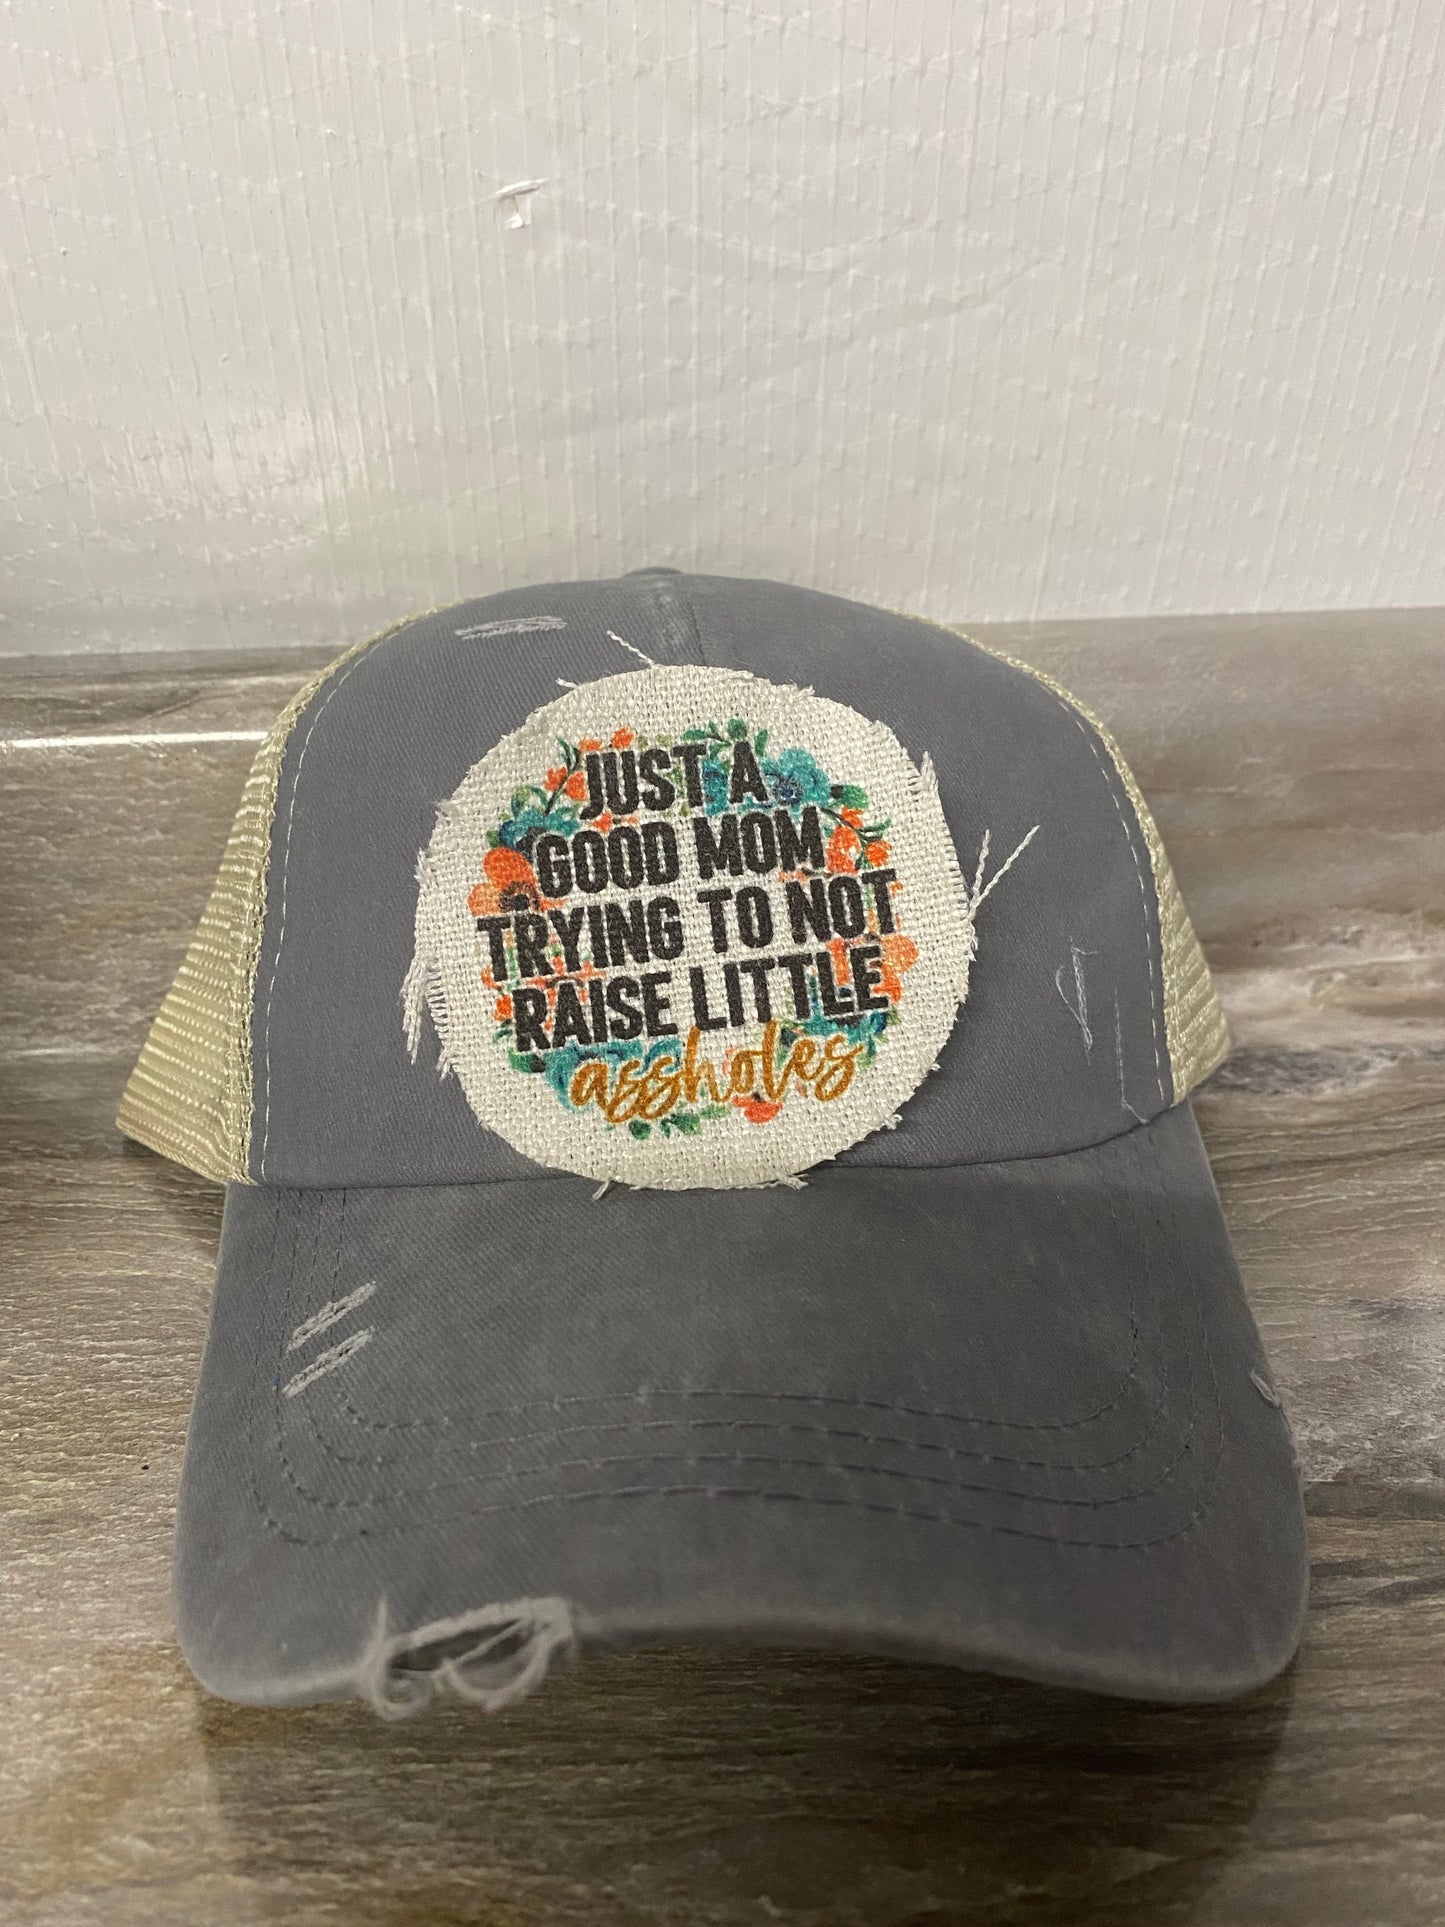 Just a Good Mom Trying To Not Raise Little A**holes Hat Patch